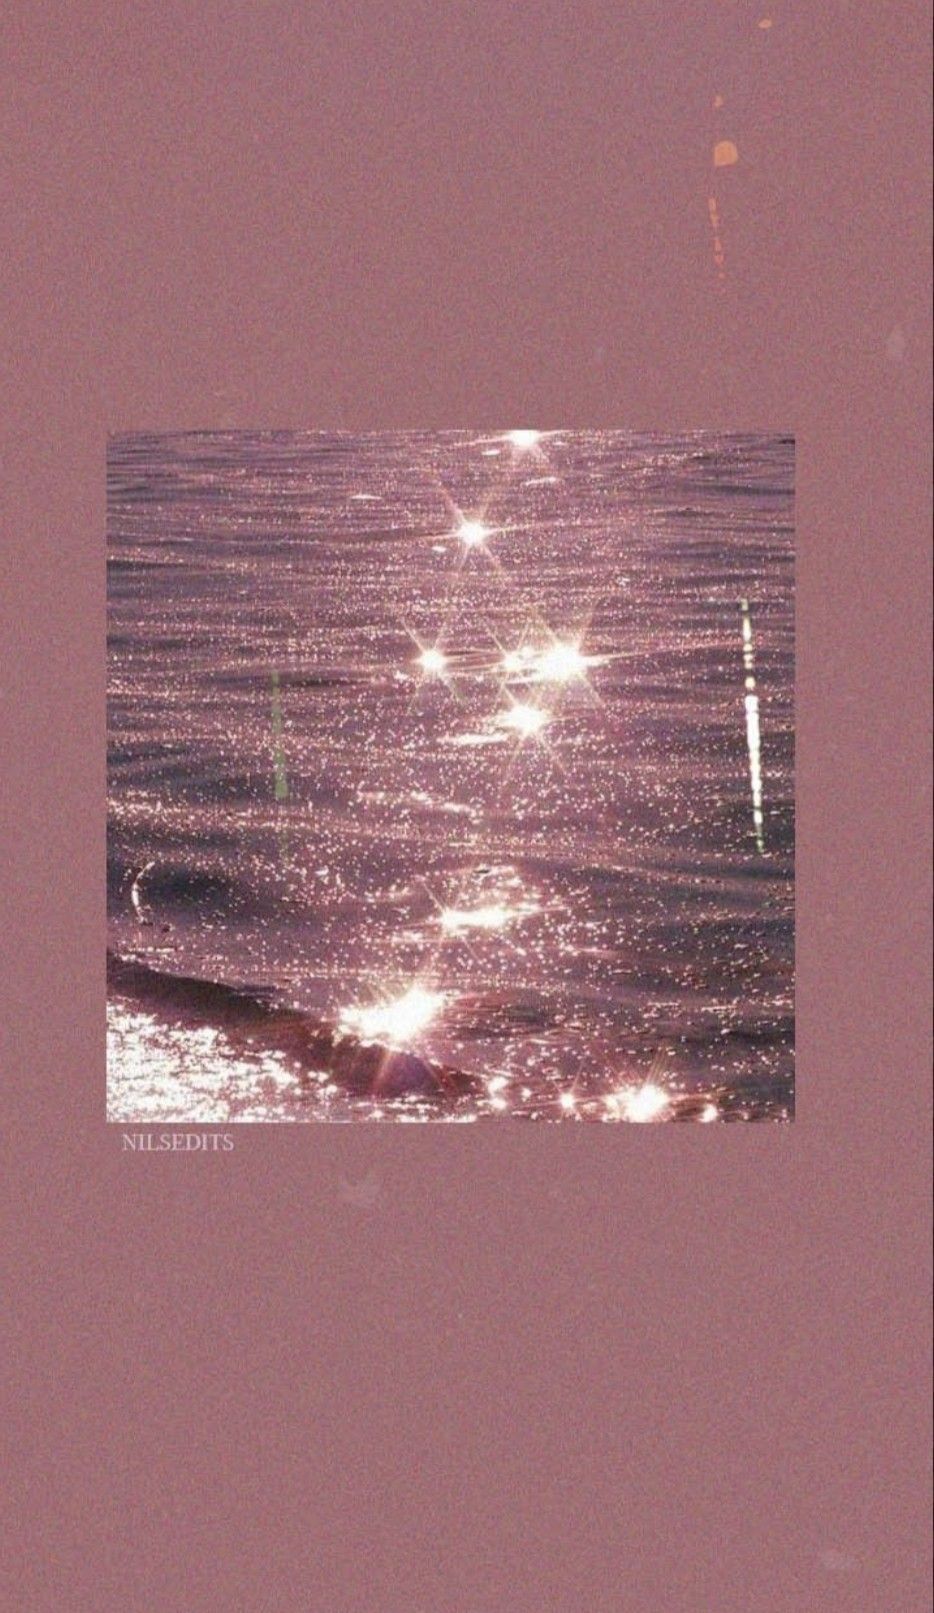 A pink cover with the sun reflecting on water - Bling